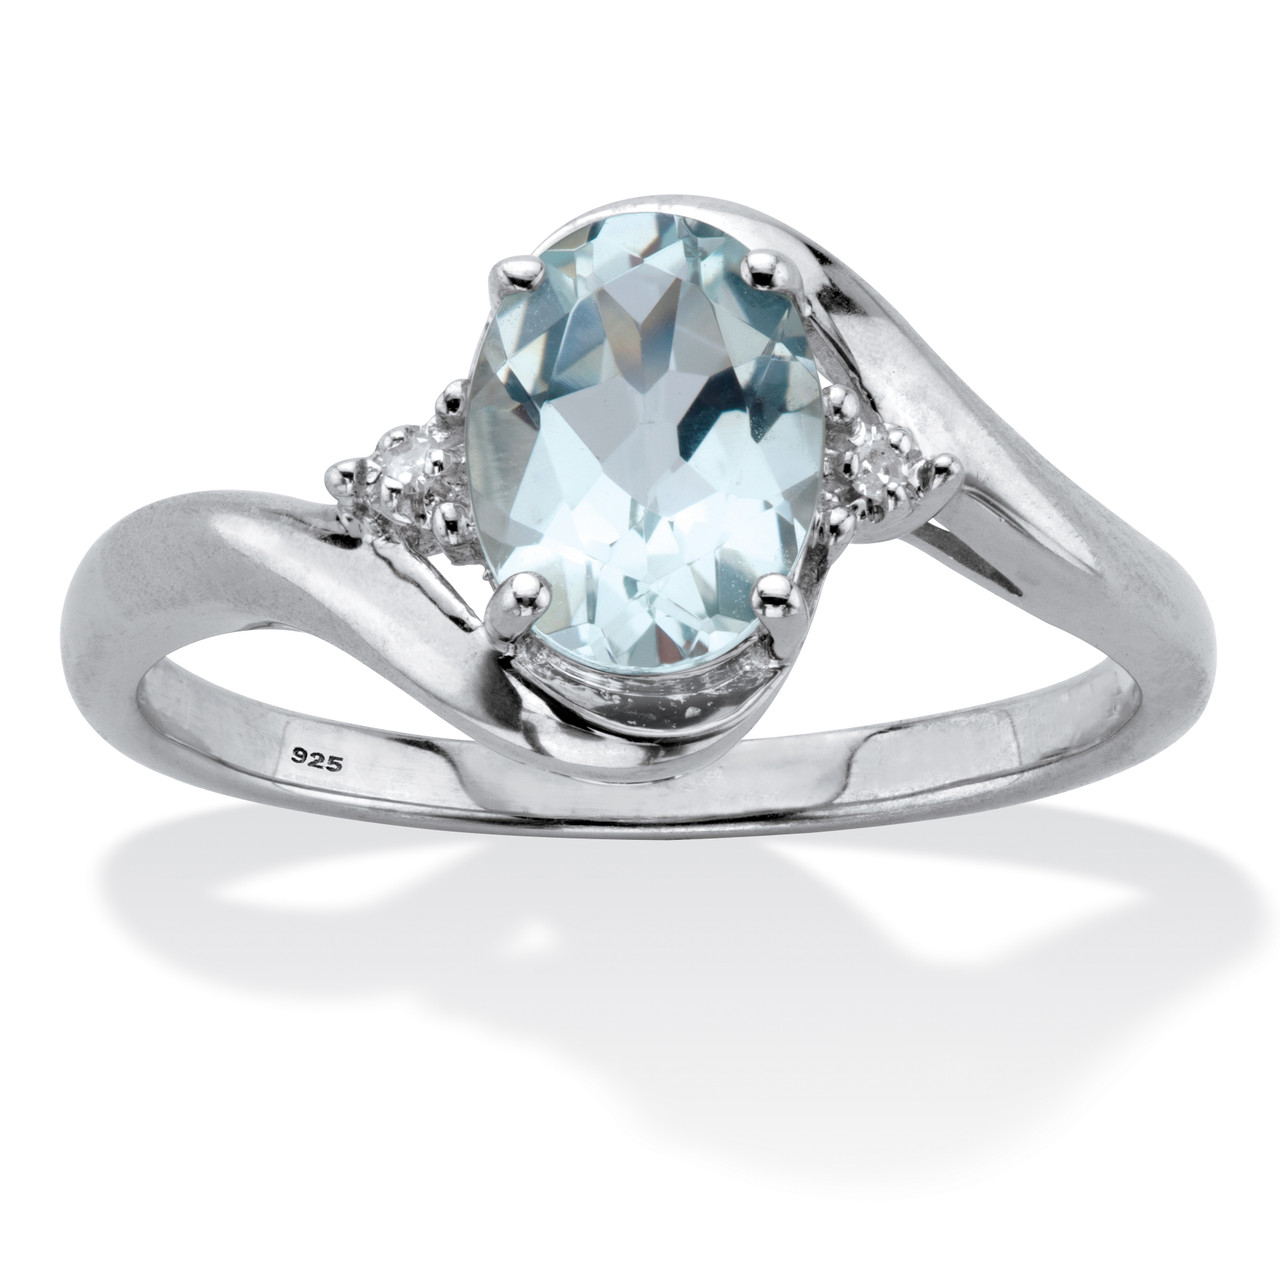 March Birthstone Oval Cut Genuine Aquamarine & Diamond Accent Bypass Ring 1.11 TCW Platinum Plated Sterling Silver